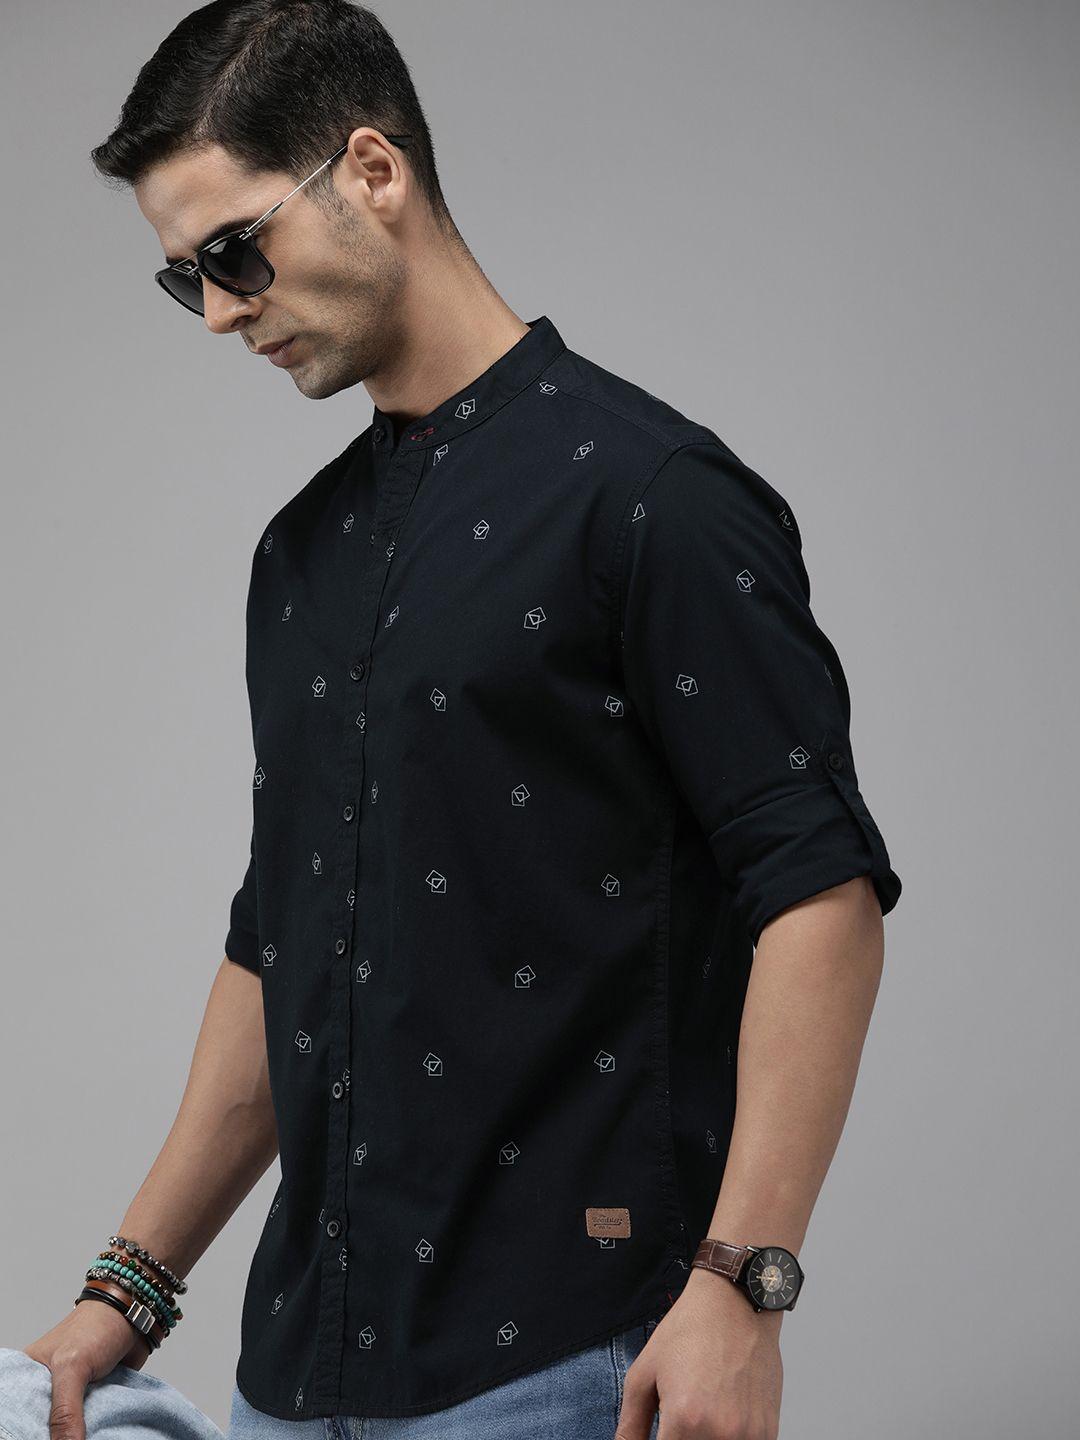 the-roadster-lifestyle-co.-men-pure-cotton-geometric-printed-casual-shirt